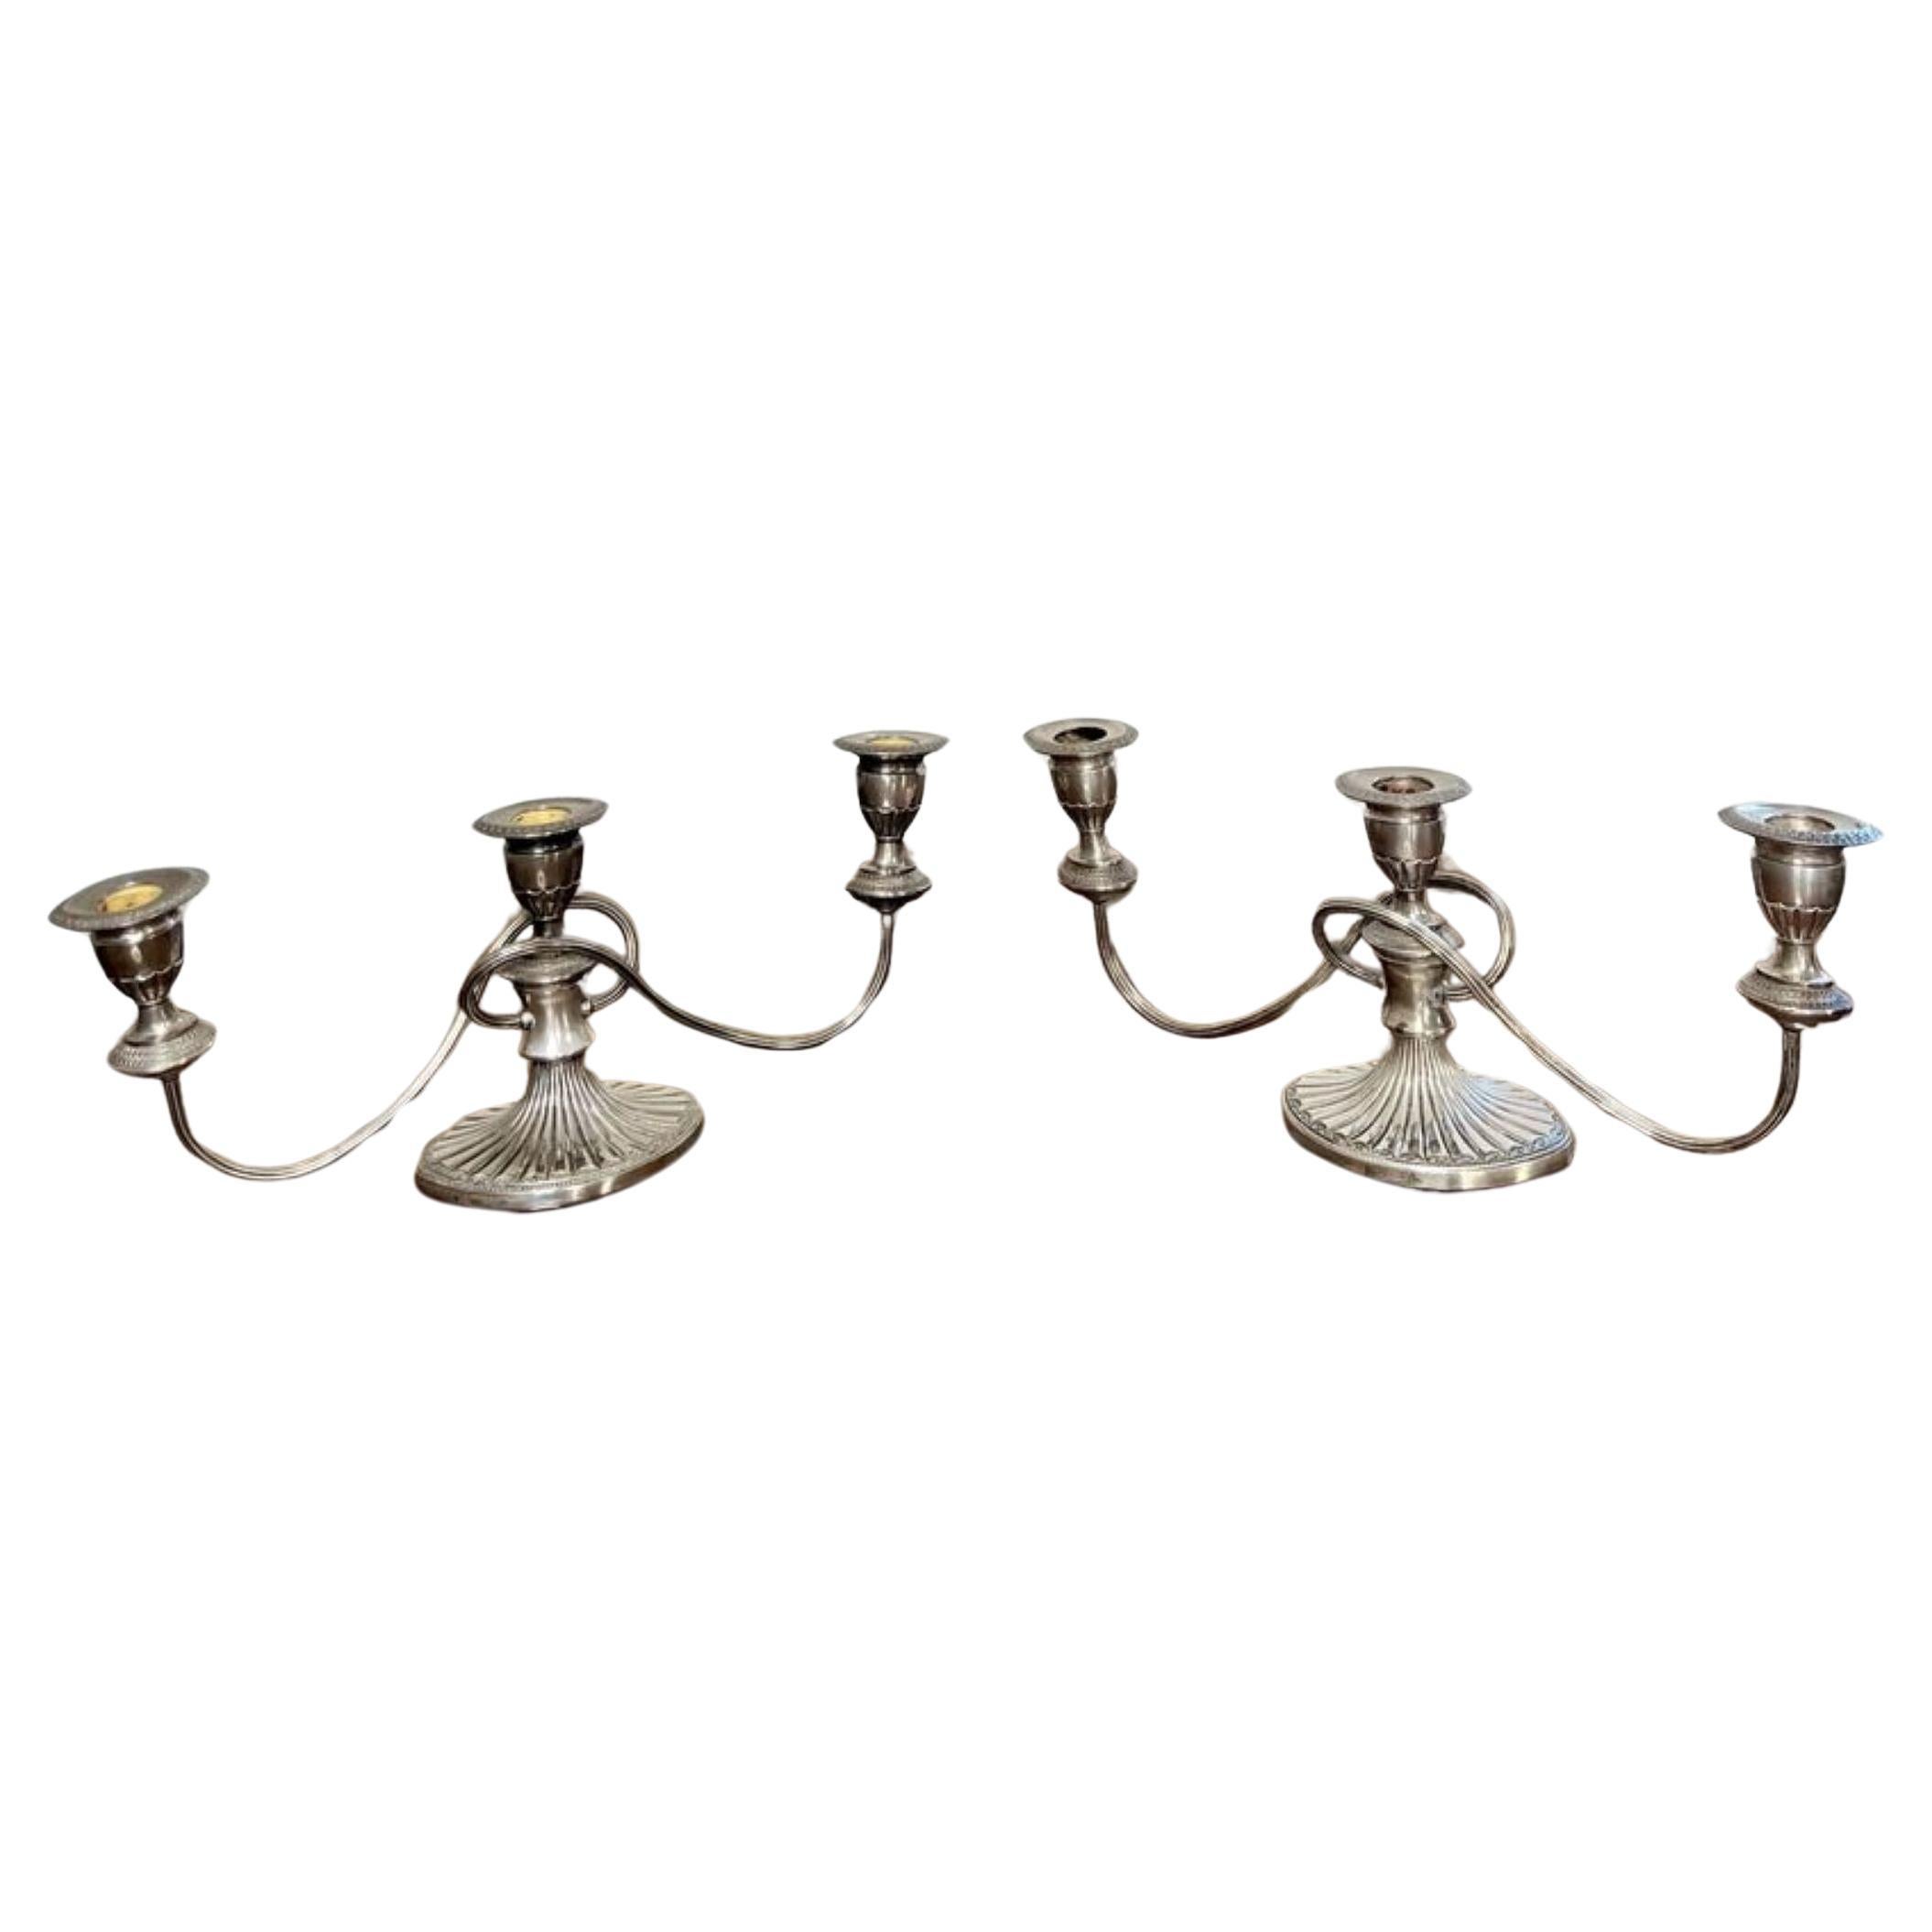 Quality pair of antique Victorian silver plated candelabras 